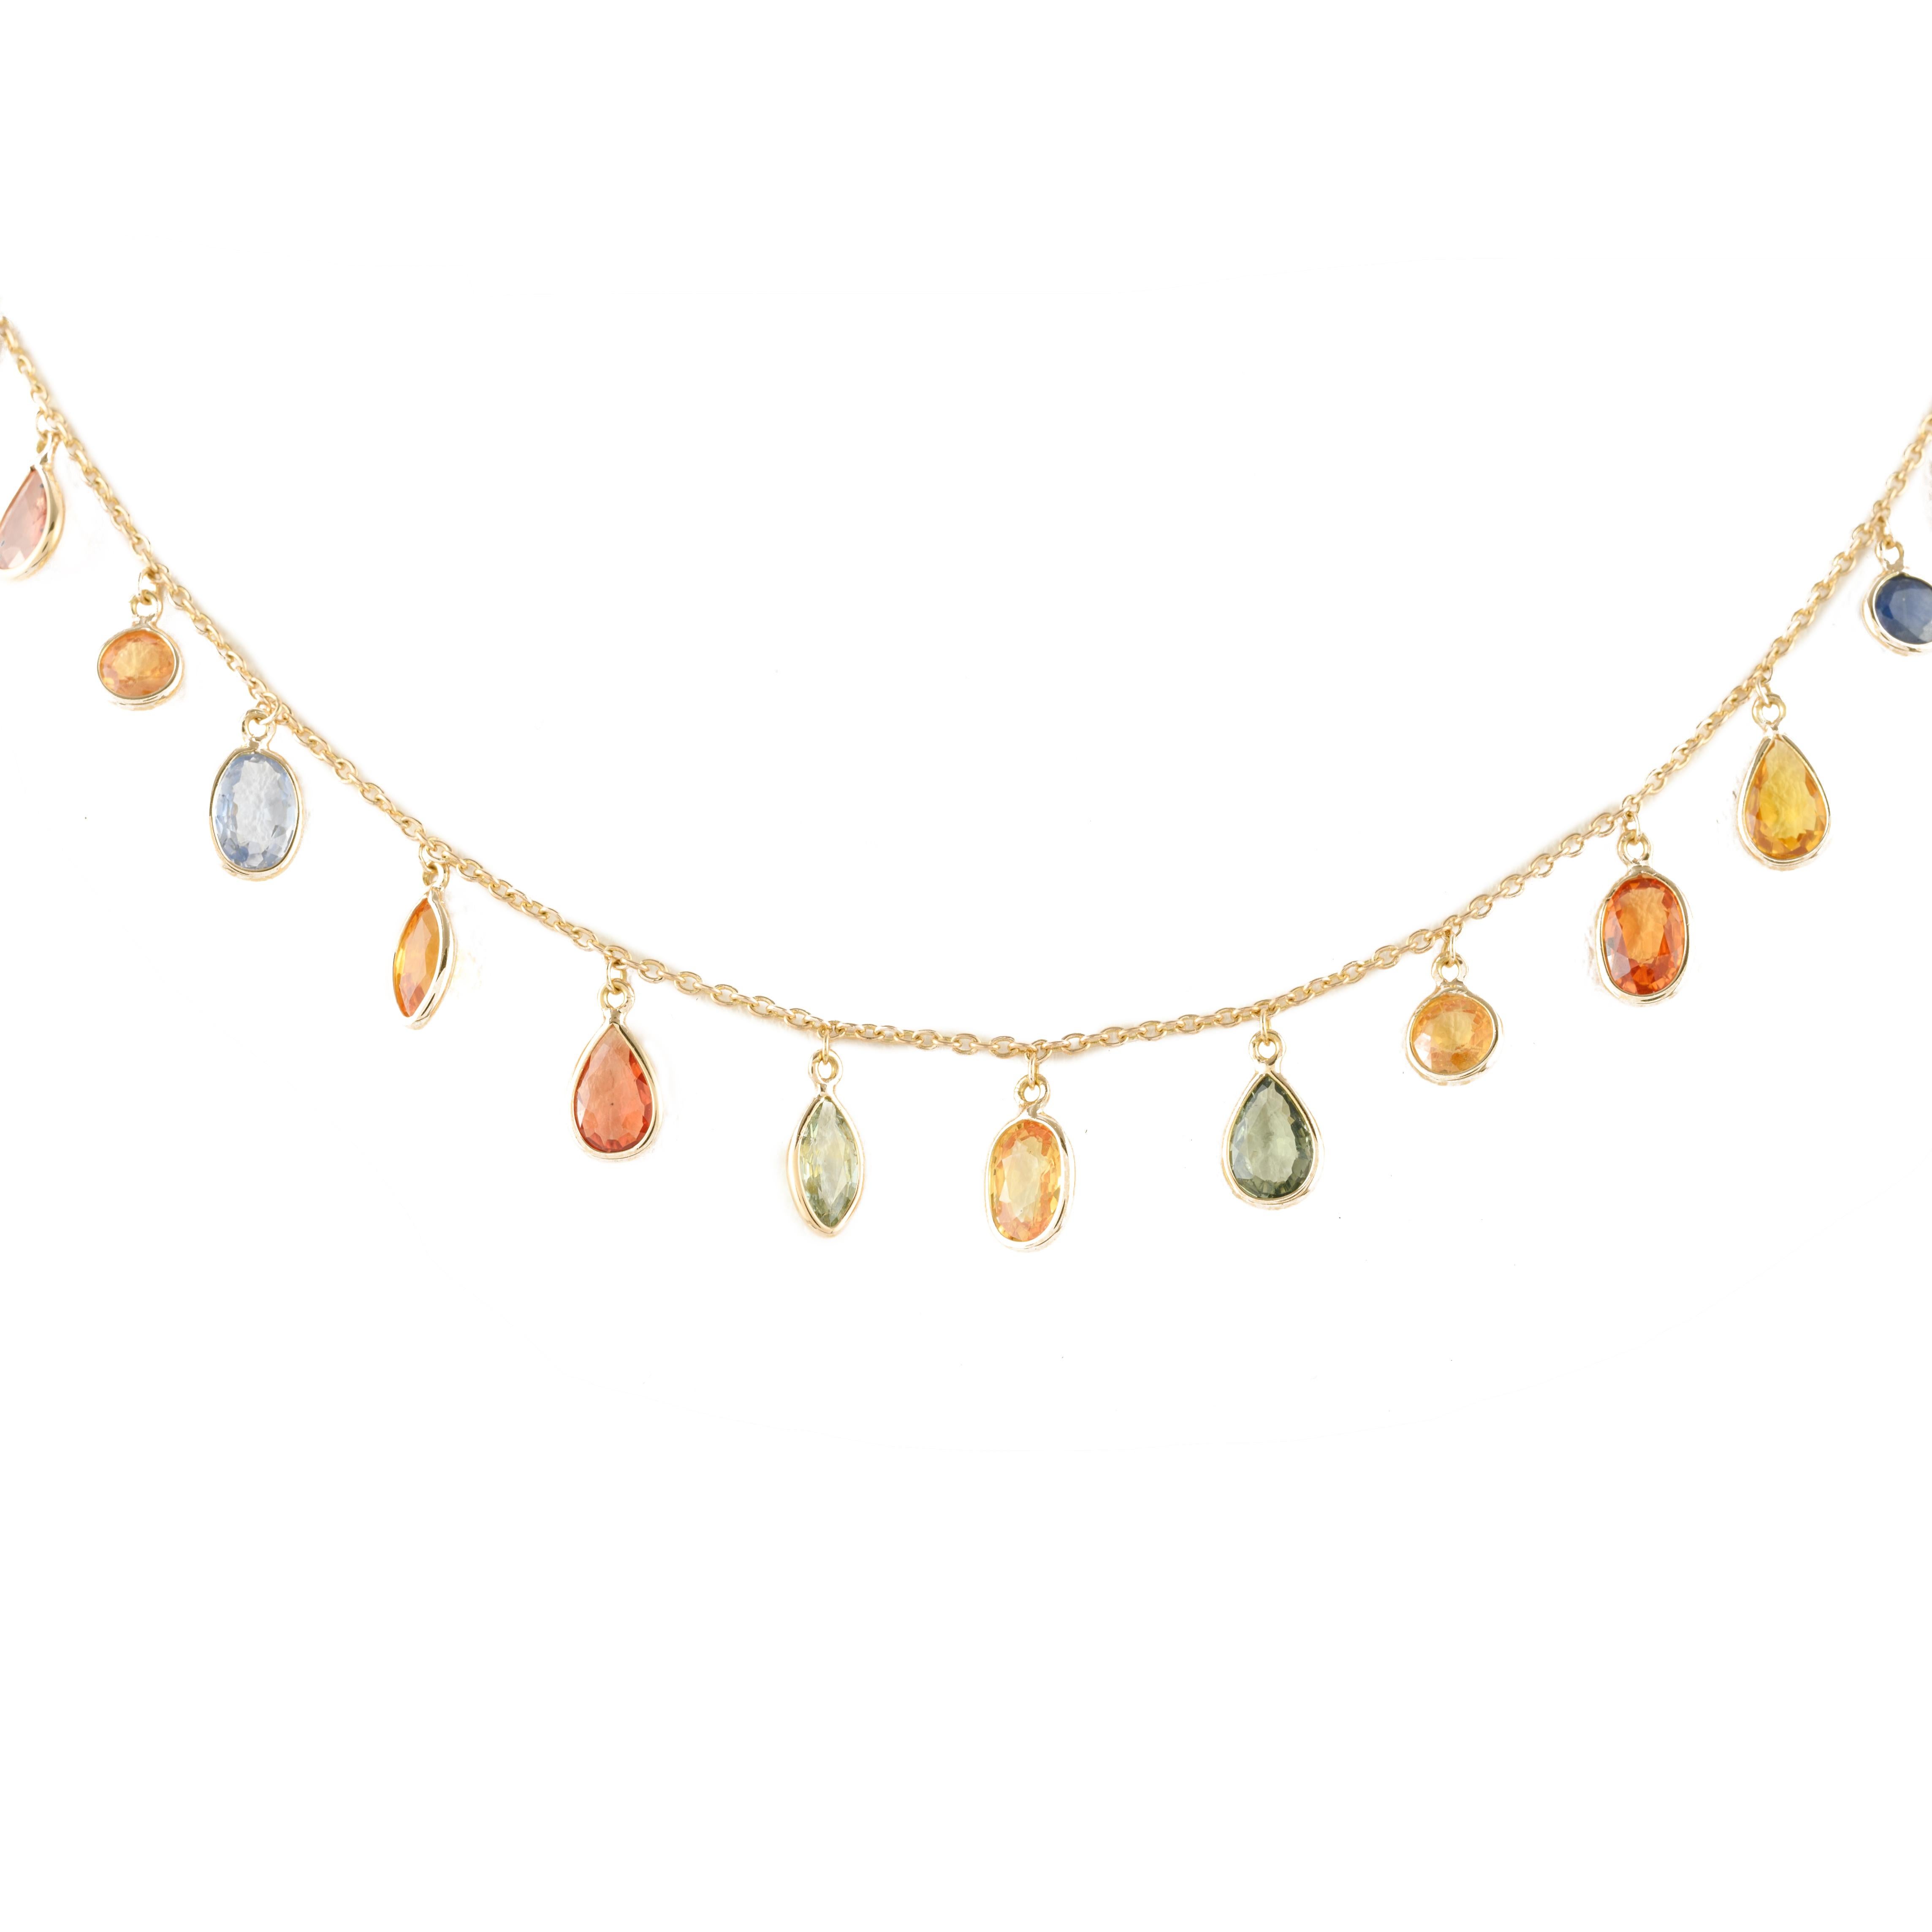 Colorful 18k Yellow Gold Dangling Multi Sapphire Chain Necklace, Bridesmaid Gift For Sale 2